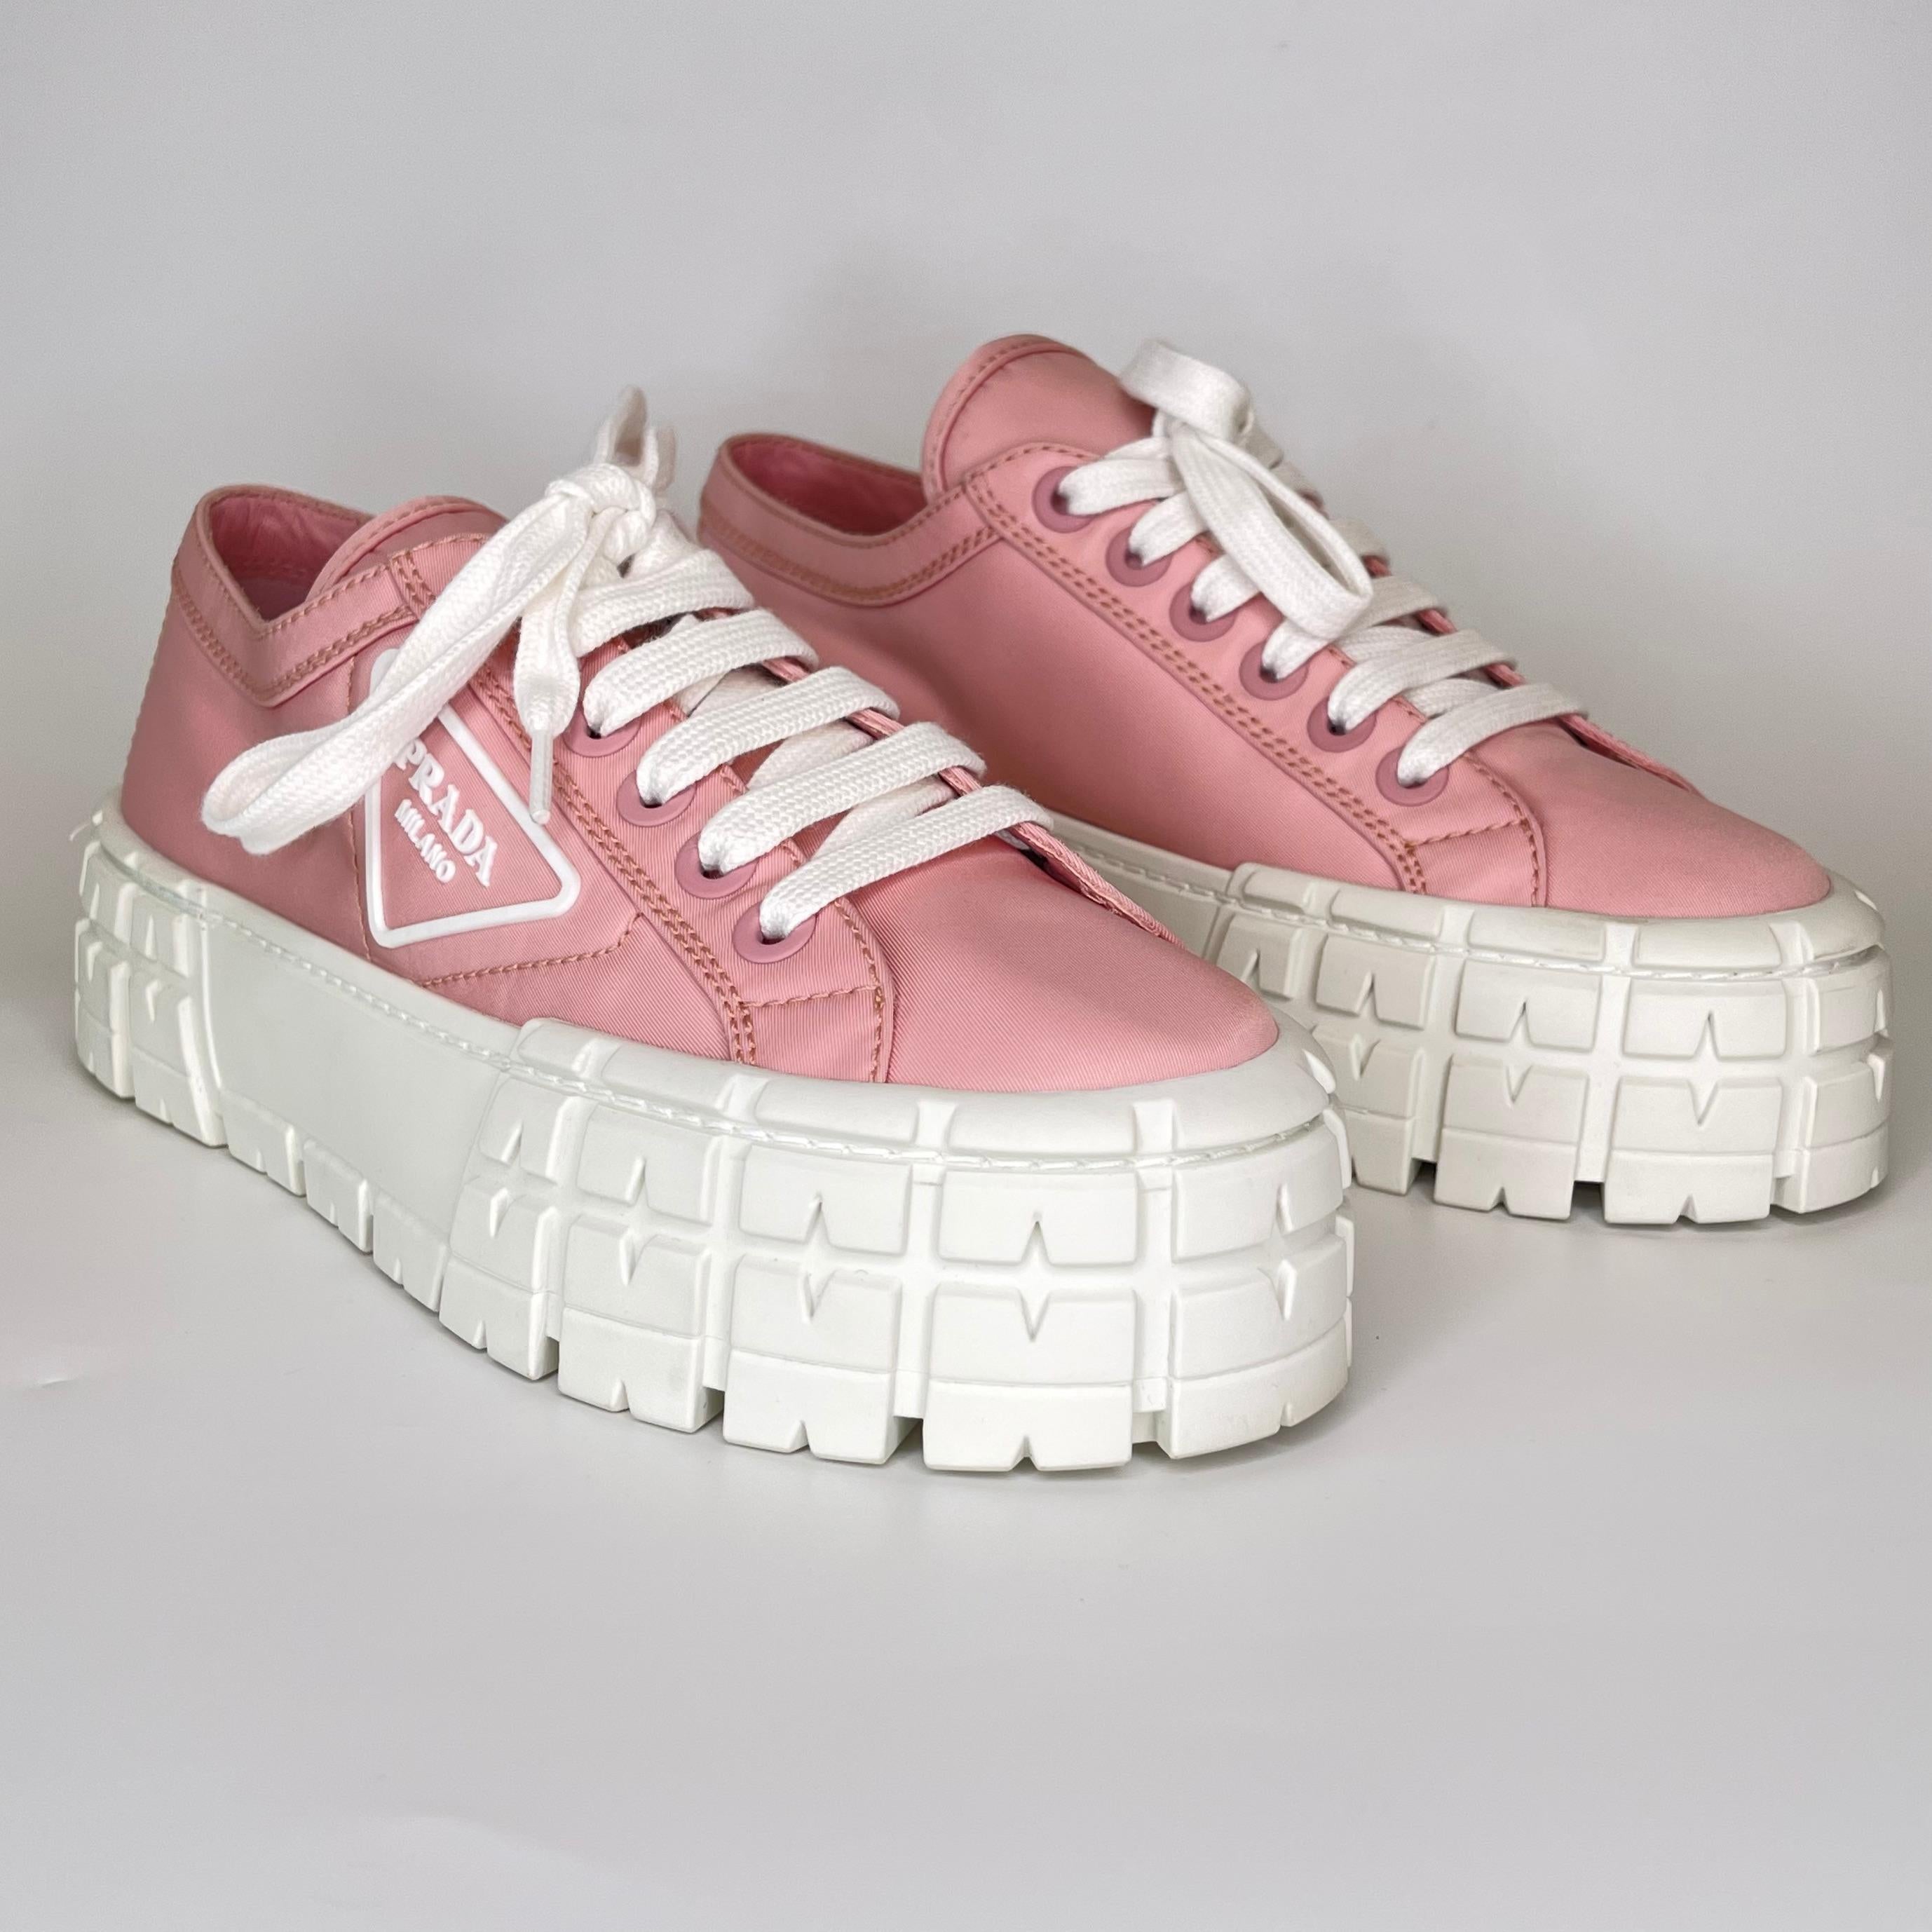 These sneakers featured Prada’s signature triangular logo on the side, a pink textile exterior, notched grooves that climb the large white platform and lace-up fastening.

COLOR: Pink / white
MATERIAL: Textile
SIZE: 7.5 US / 38.5 EU
PLATFORM HEIGHT: